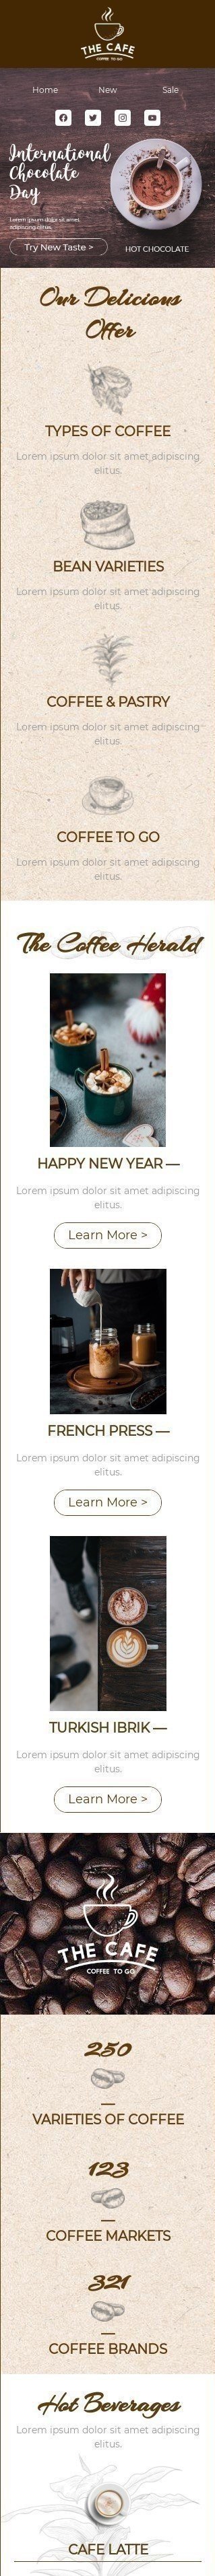 International Chocolate Day Email Template «Try a new taste» for Beverages industry mobile view